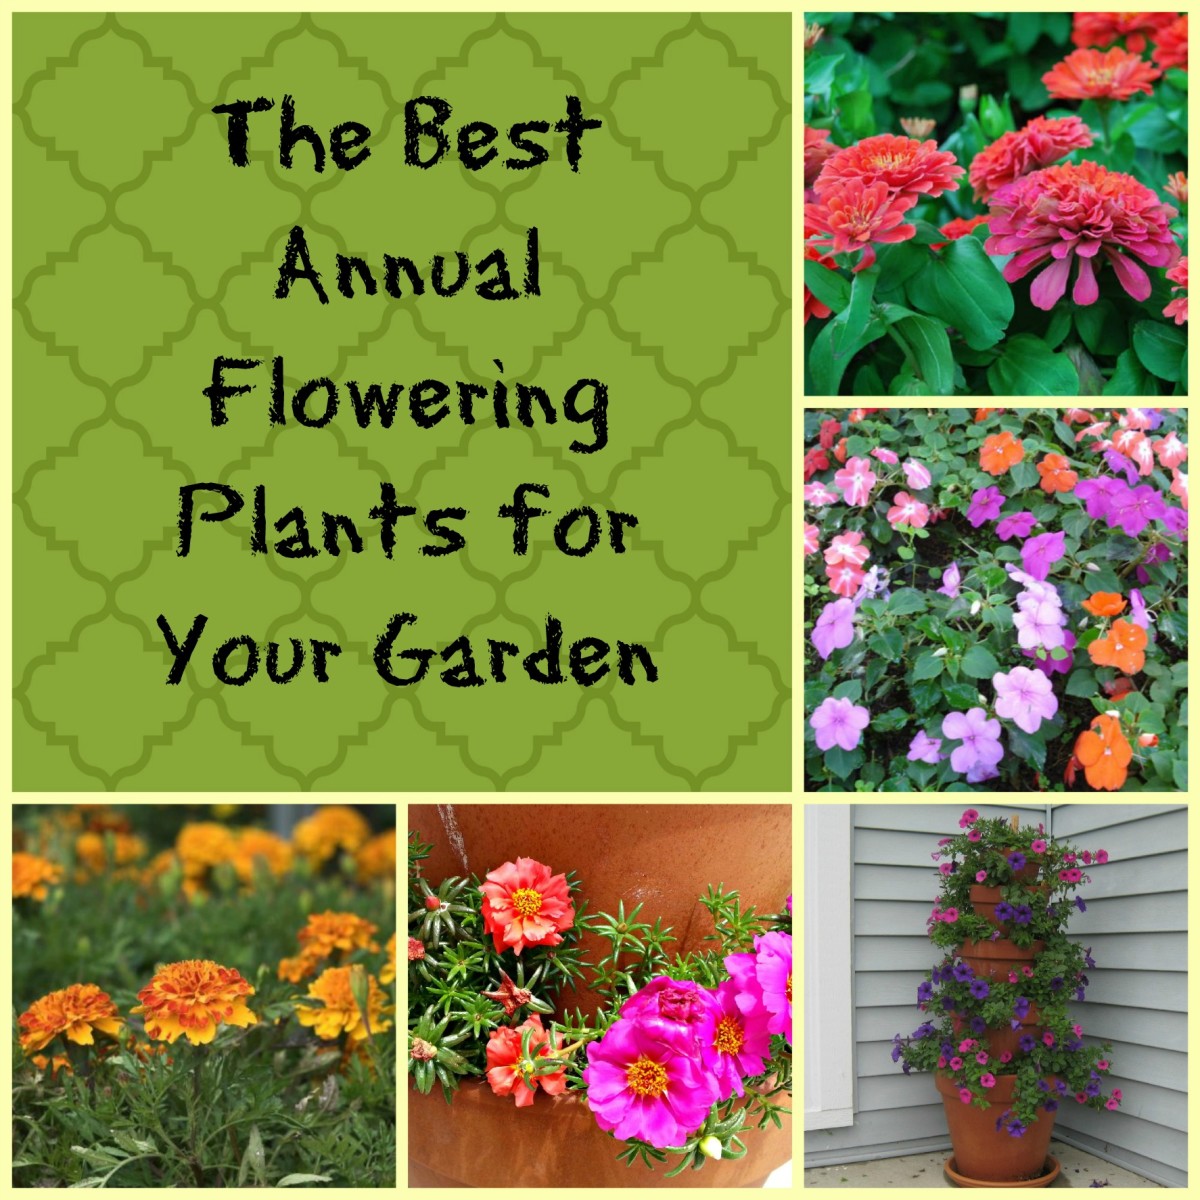 The Best Annual Flowering Plants for Your Garden | HubPages